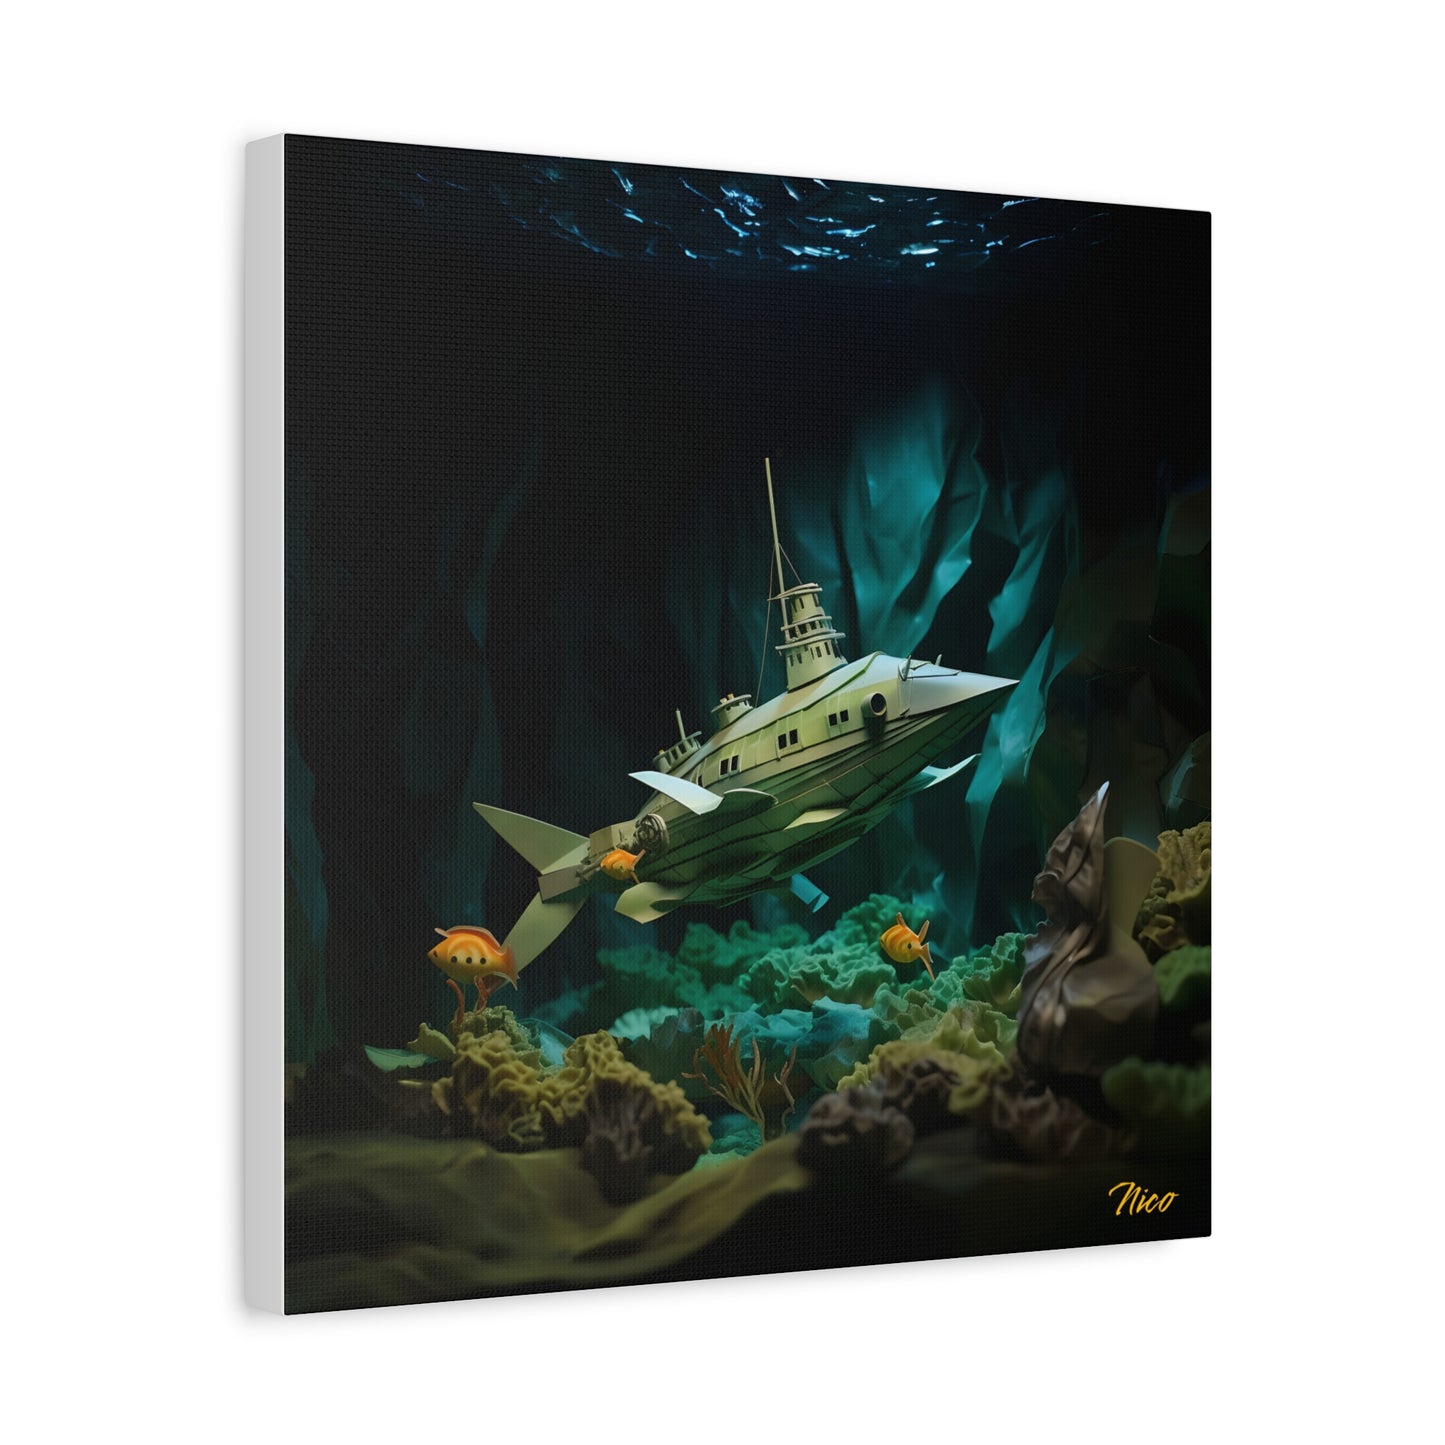 20,000 Leagues Under The Sea Series Print #8 - Streched Matte Canvas Print, 1.25" Thick